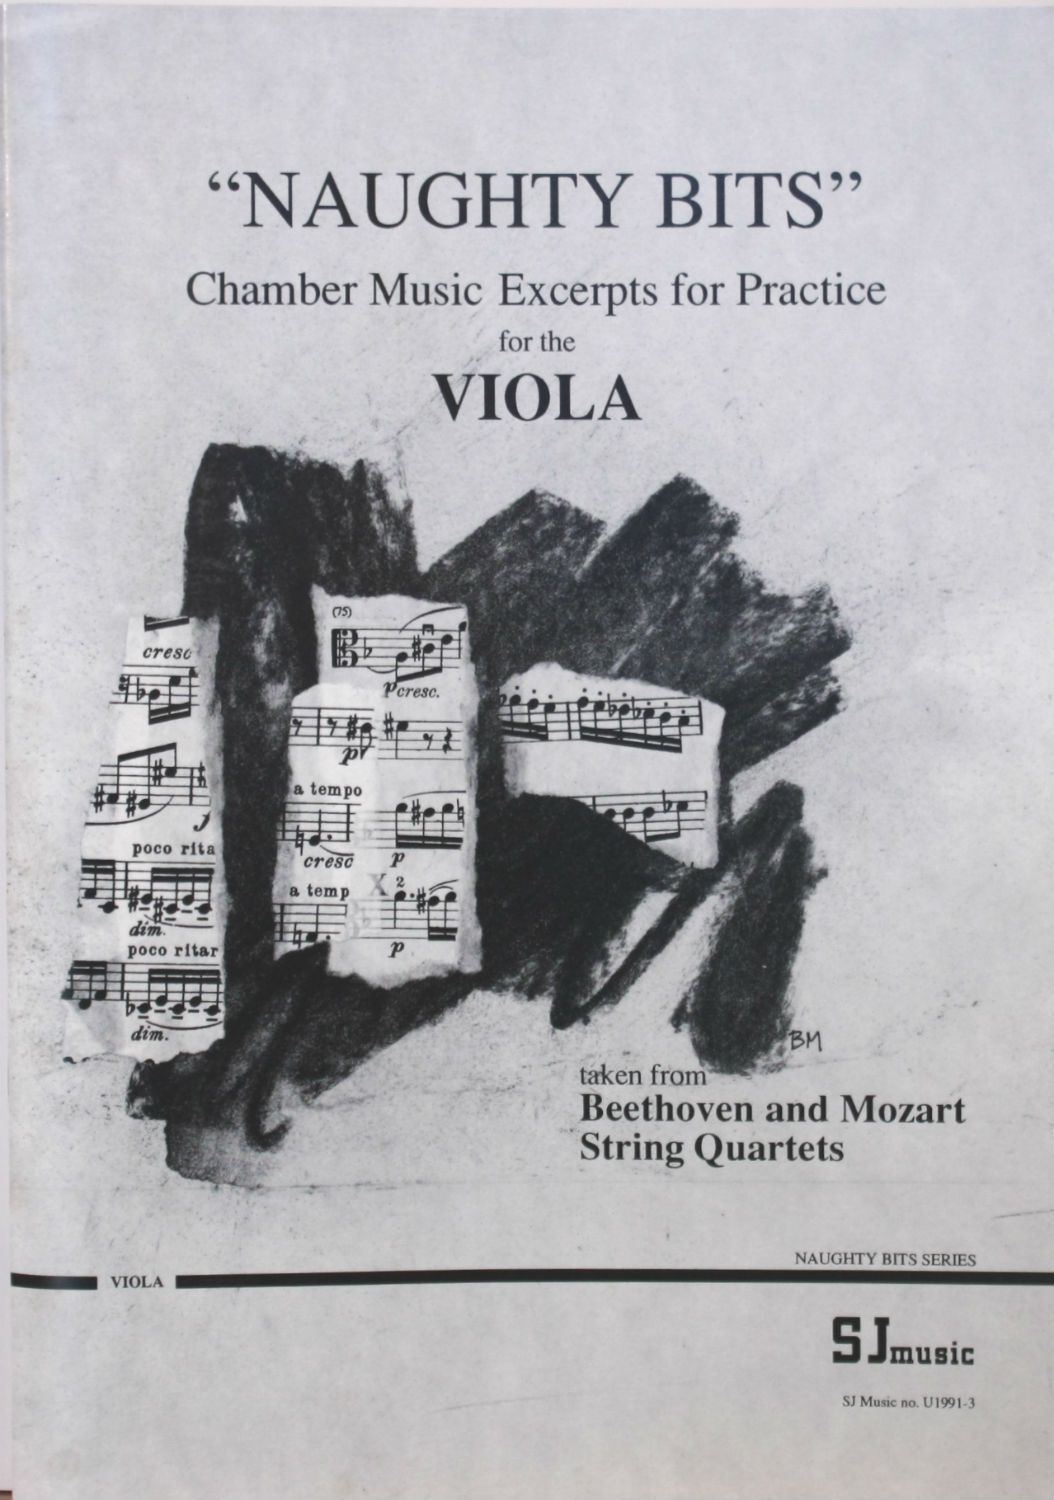 Naughty Bits for Viola - Extracts from Beethoven & Mozart String Quartets